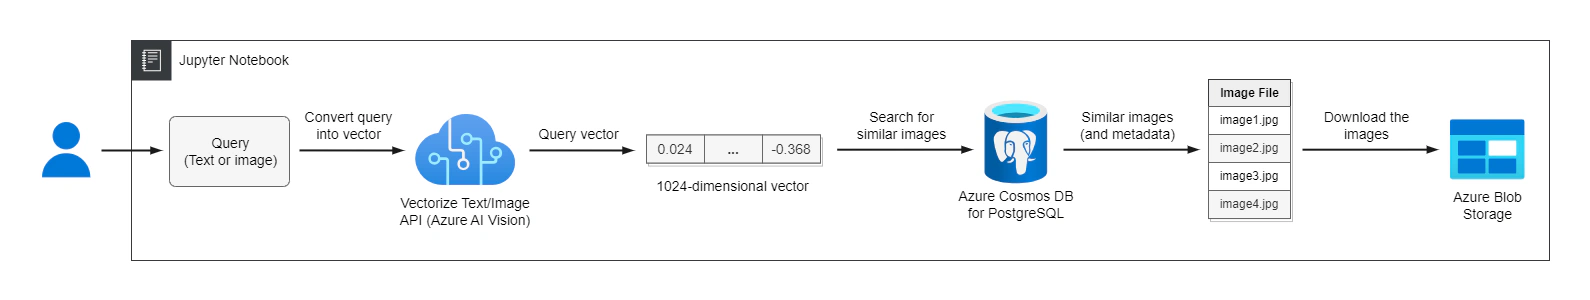 Image similarity search workflow.